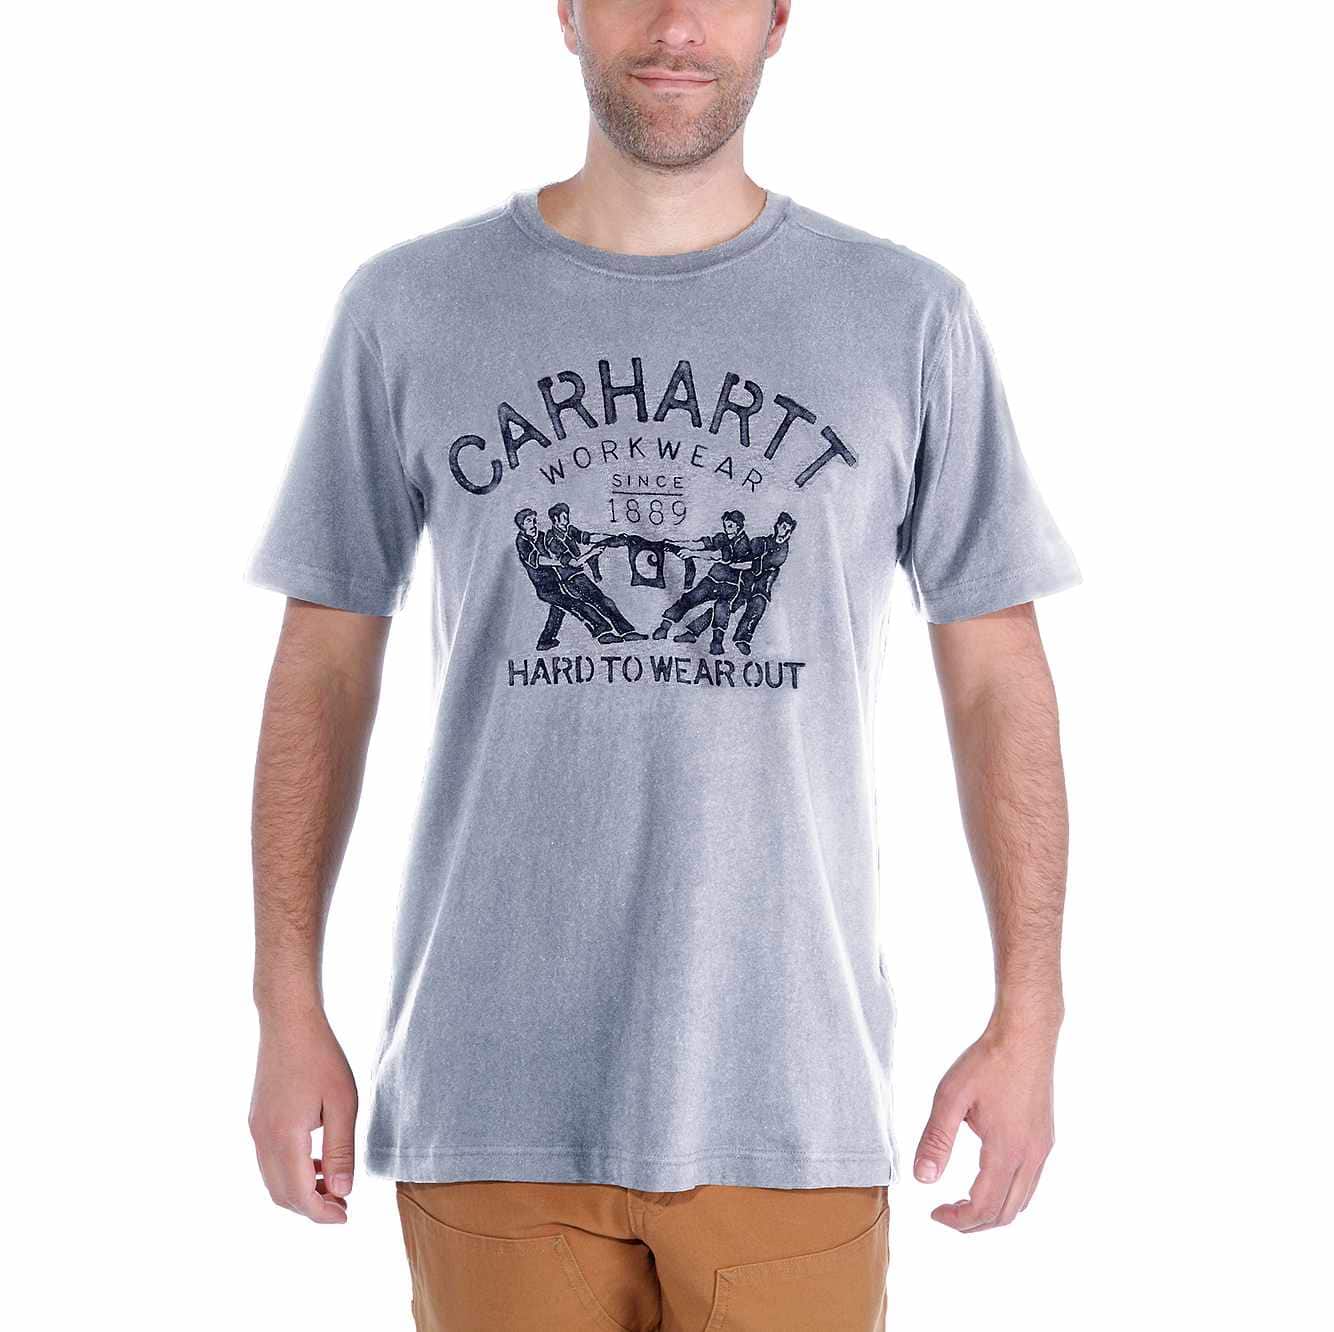 Carhartt Maddock Hard To Wear Out T-Shirt